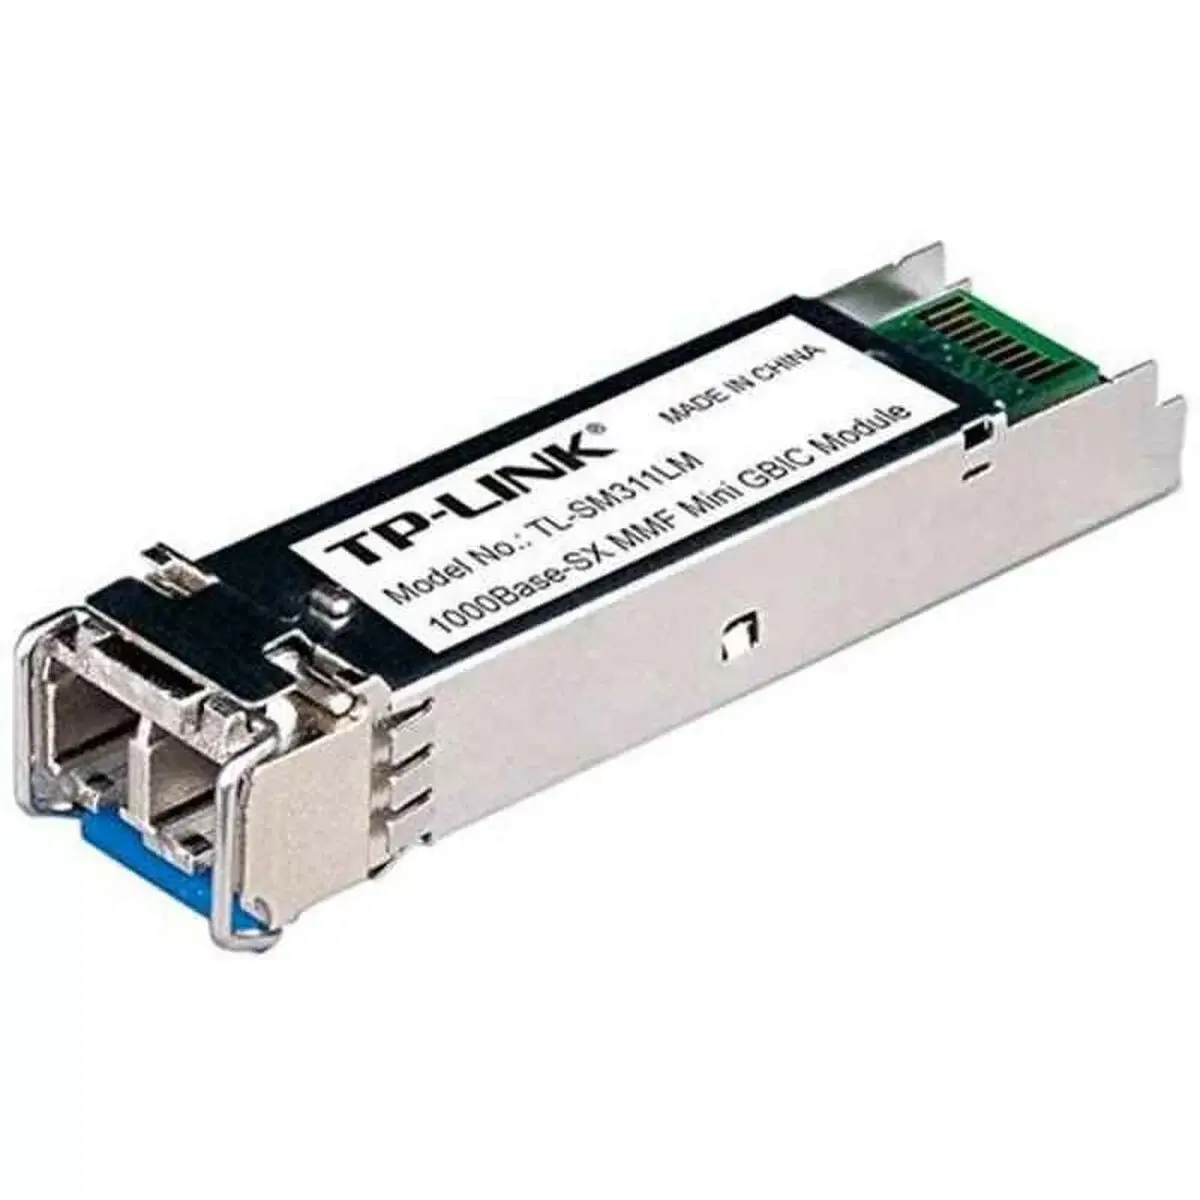 Selected image for TP-LINK SFP modul Gigabit SFP module, Multi-mode, MiniGBIC, LC interface, Up to 550/275m distance